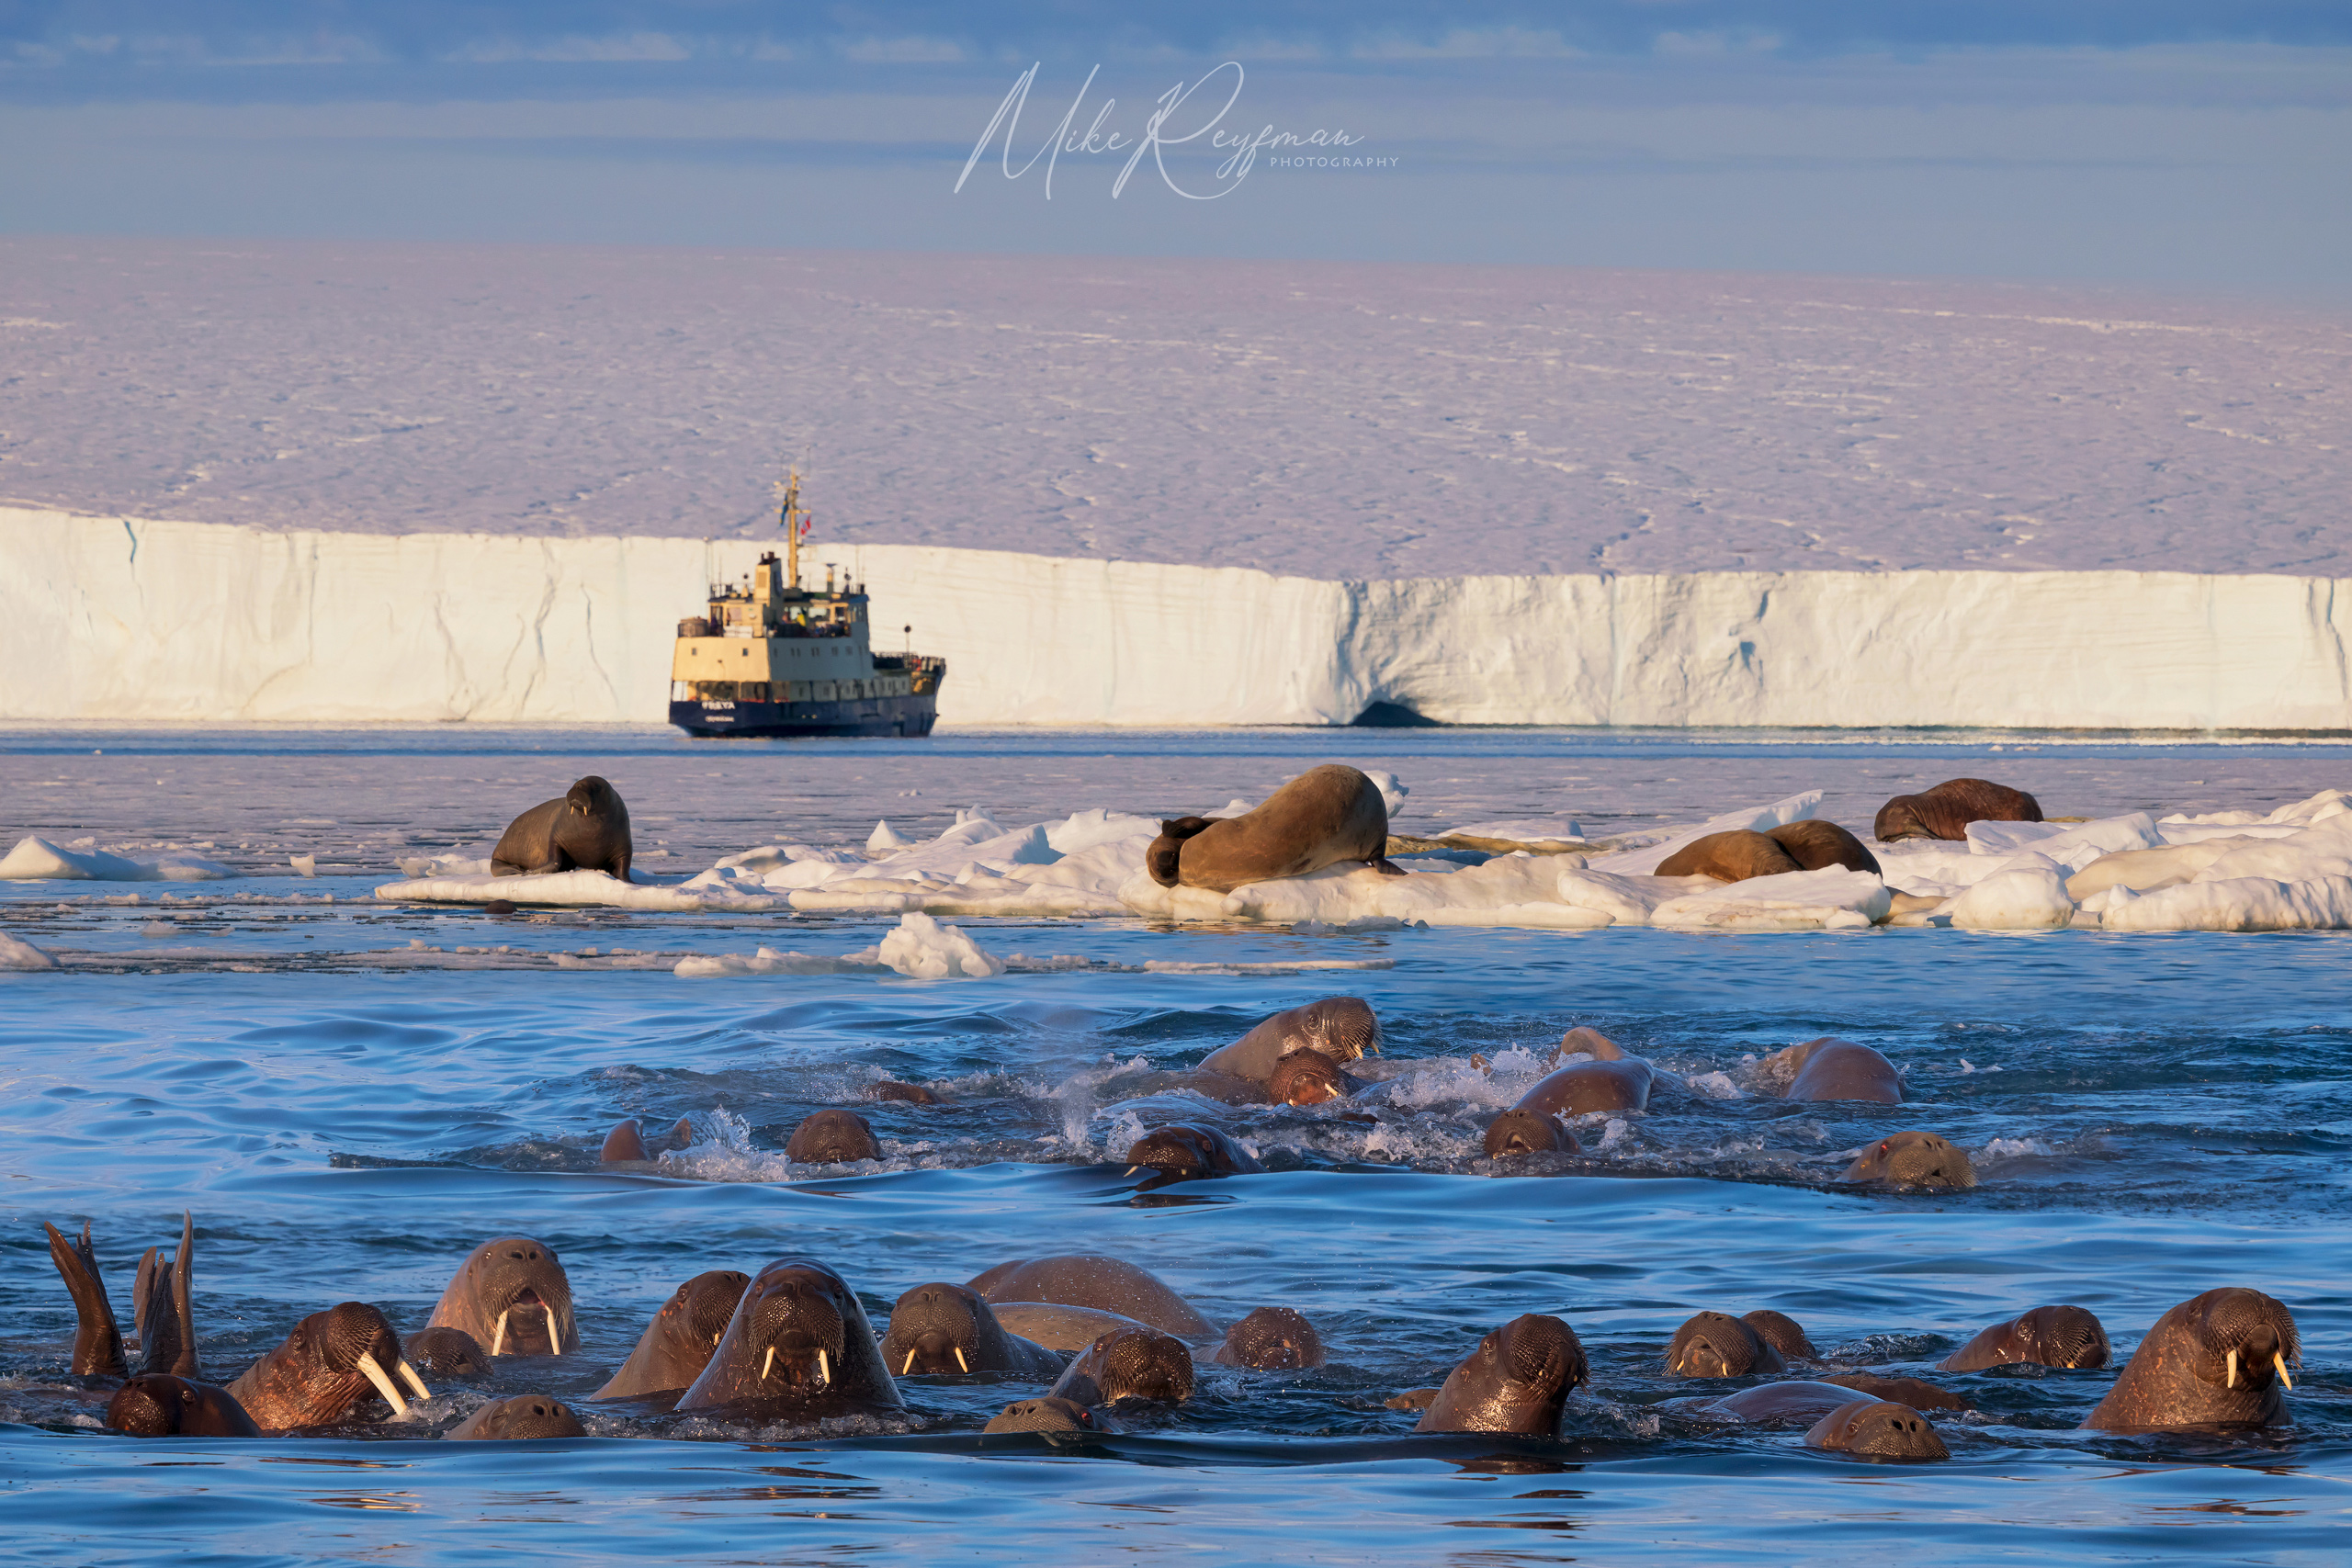 The Gang of Walruses WL-SV-007-Z8A6951 - The Walruses and Seals of Svalbard (Spitsbergen) - Mike Reyfman Photography